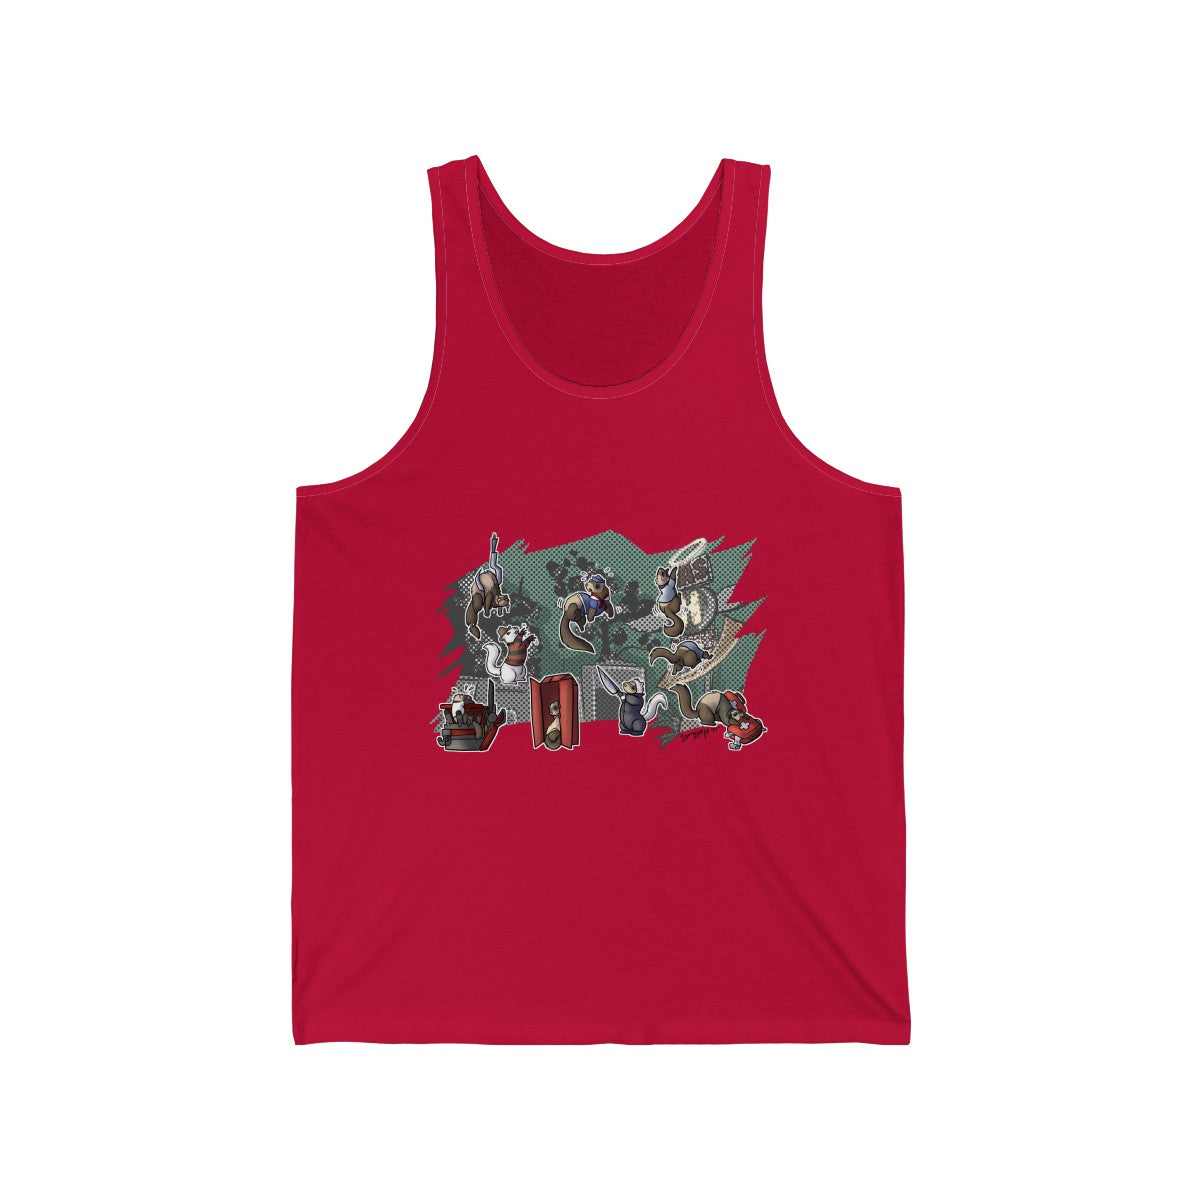 Thabo's Store - Tank Top Tank Top Thabo Meerkat Red XS 